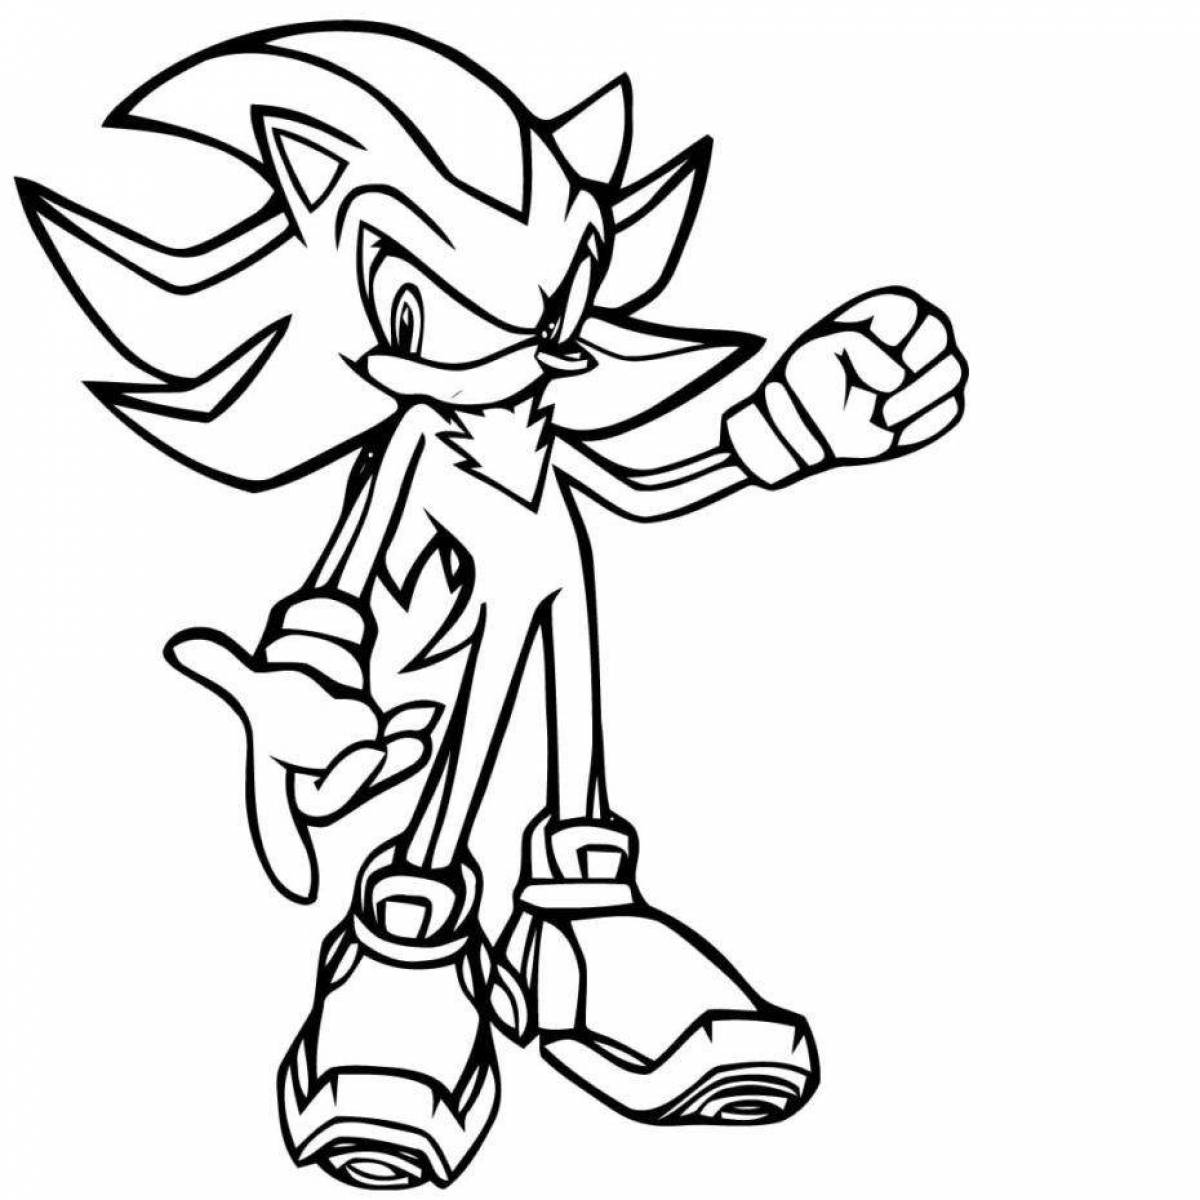 Sparkling sonic x coloring book